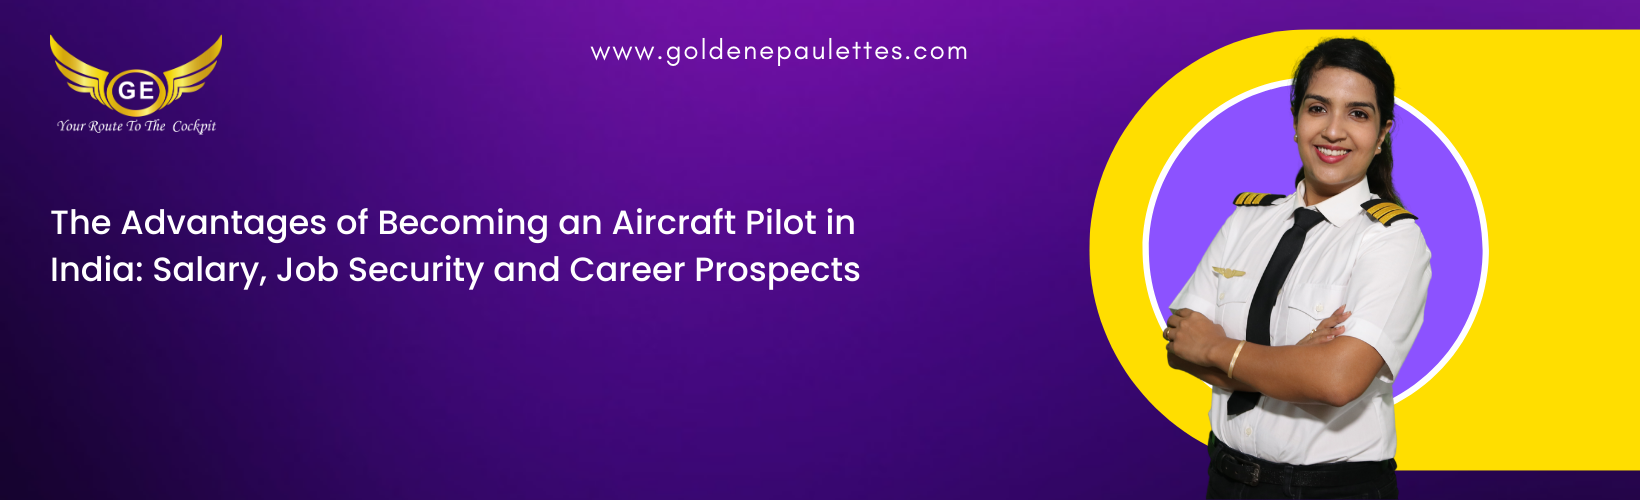 The Benefits of Becoming an Aircraft Pilot in India